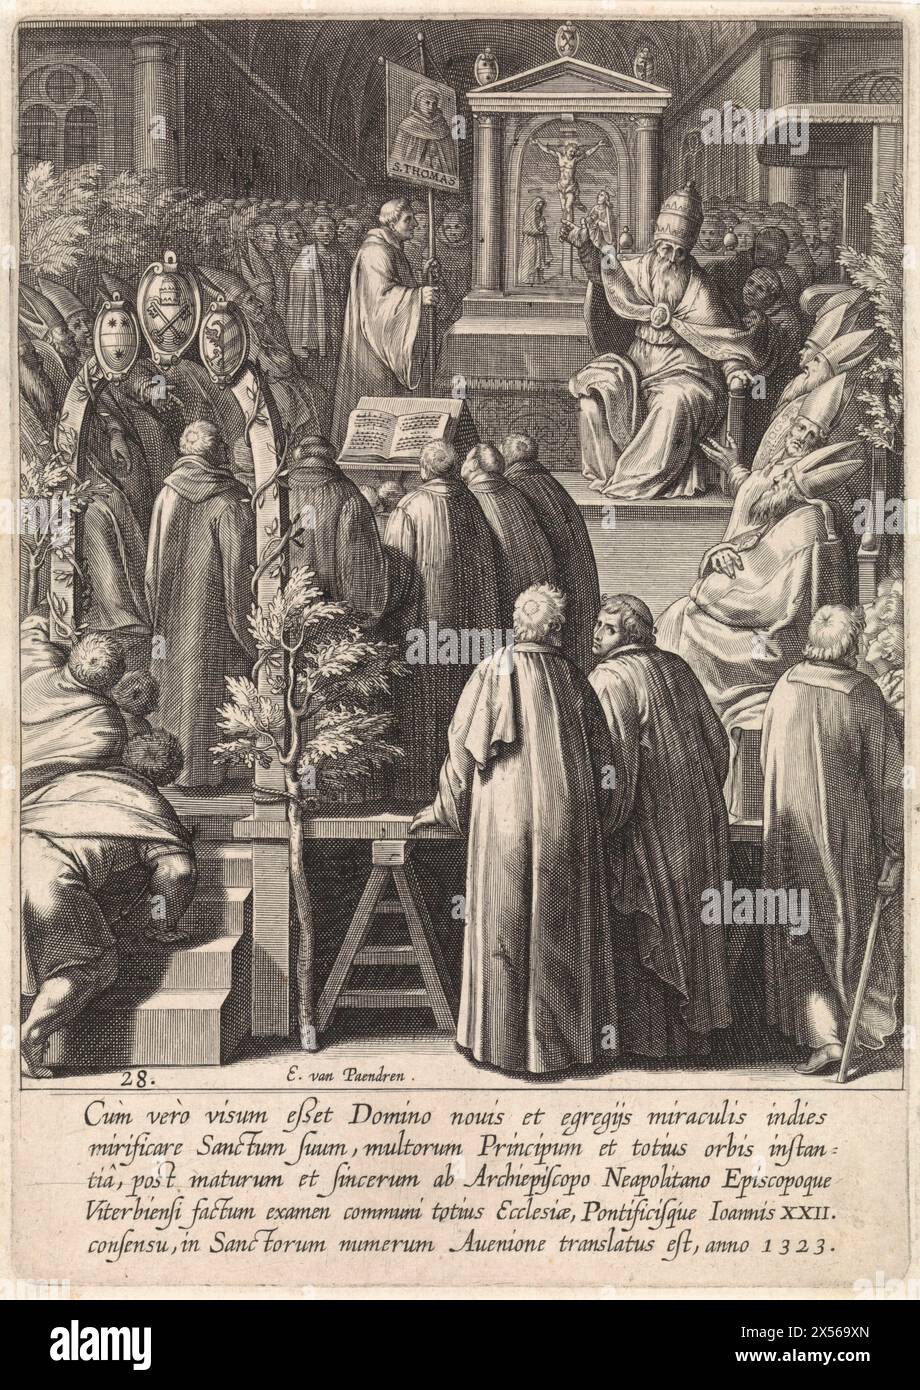 Canonization of Thomas Aquinas, Egbert van Panderen, after Otto van Veen, 1610 - Church interior with Pope John XXII pointing to an image of Thomas Aquinas. He is surrounded by monks and bishops. In the margin a five-line caption in Latin. Stock Photo